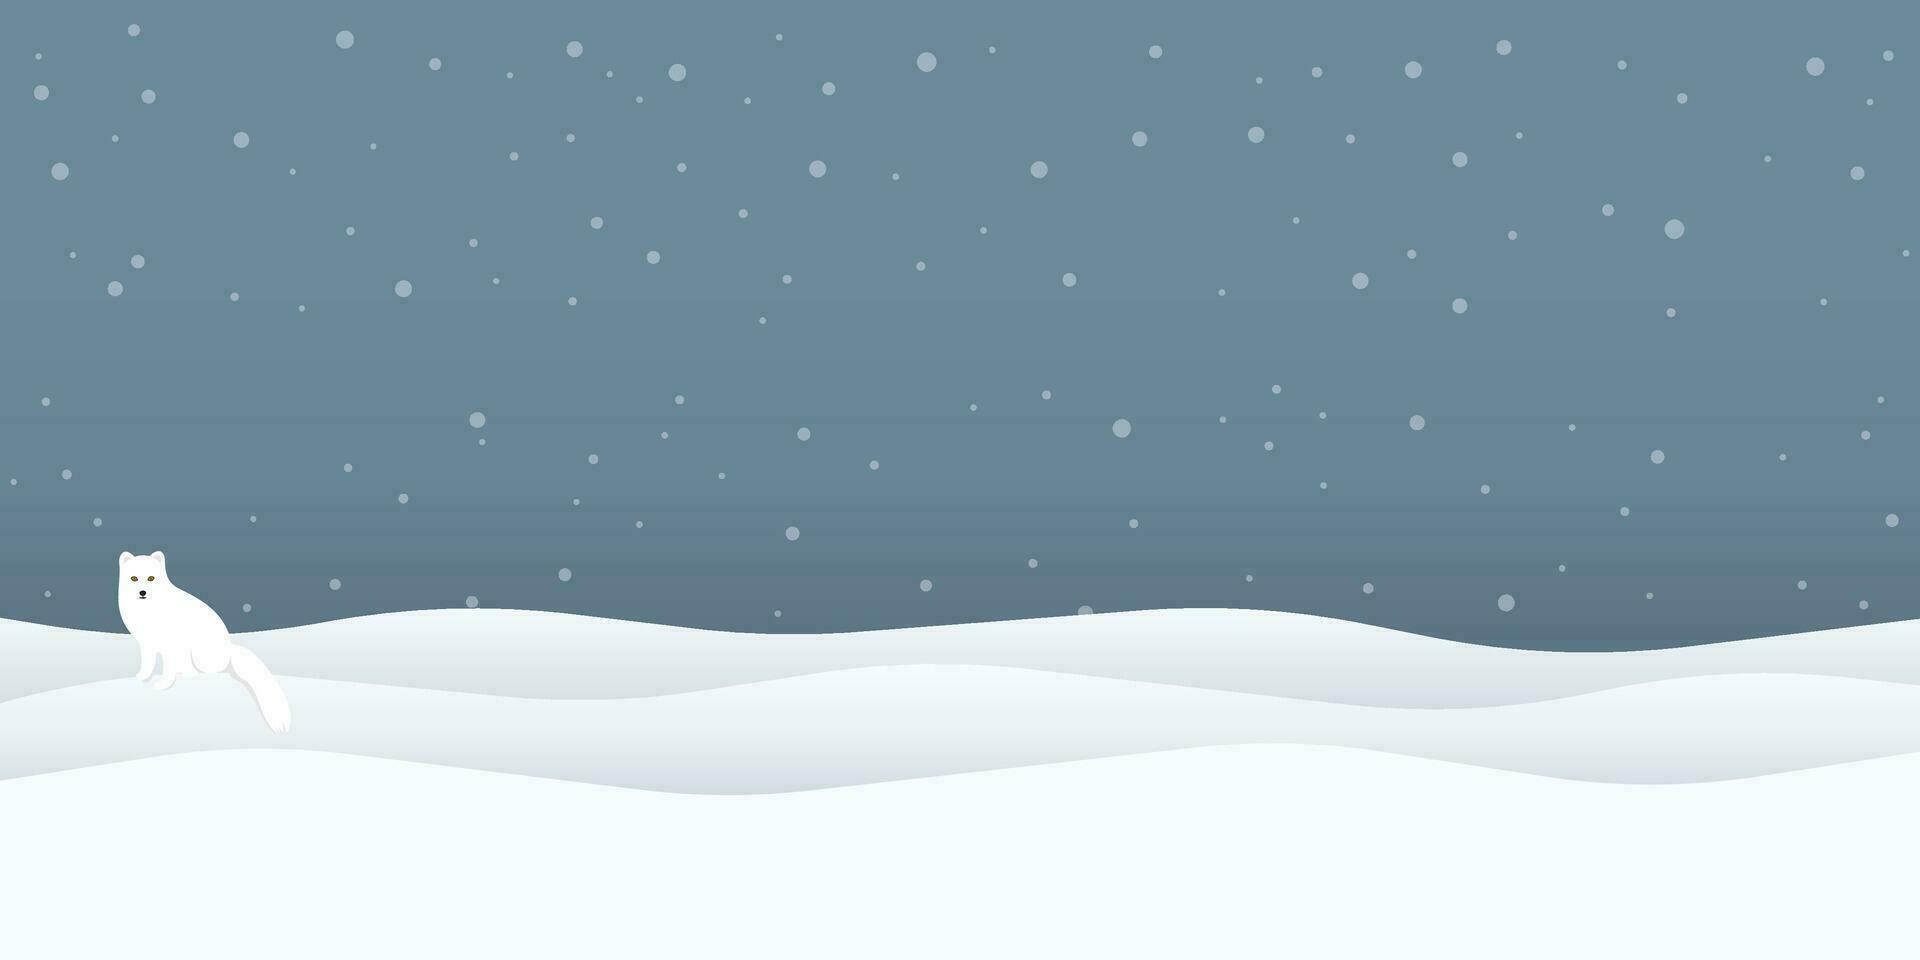 Arctic Fox in snowland at night vector illustration. Snow landscape concept have blank space.